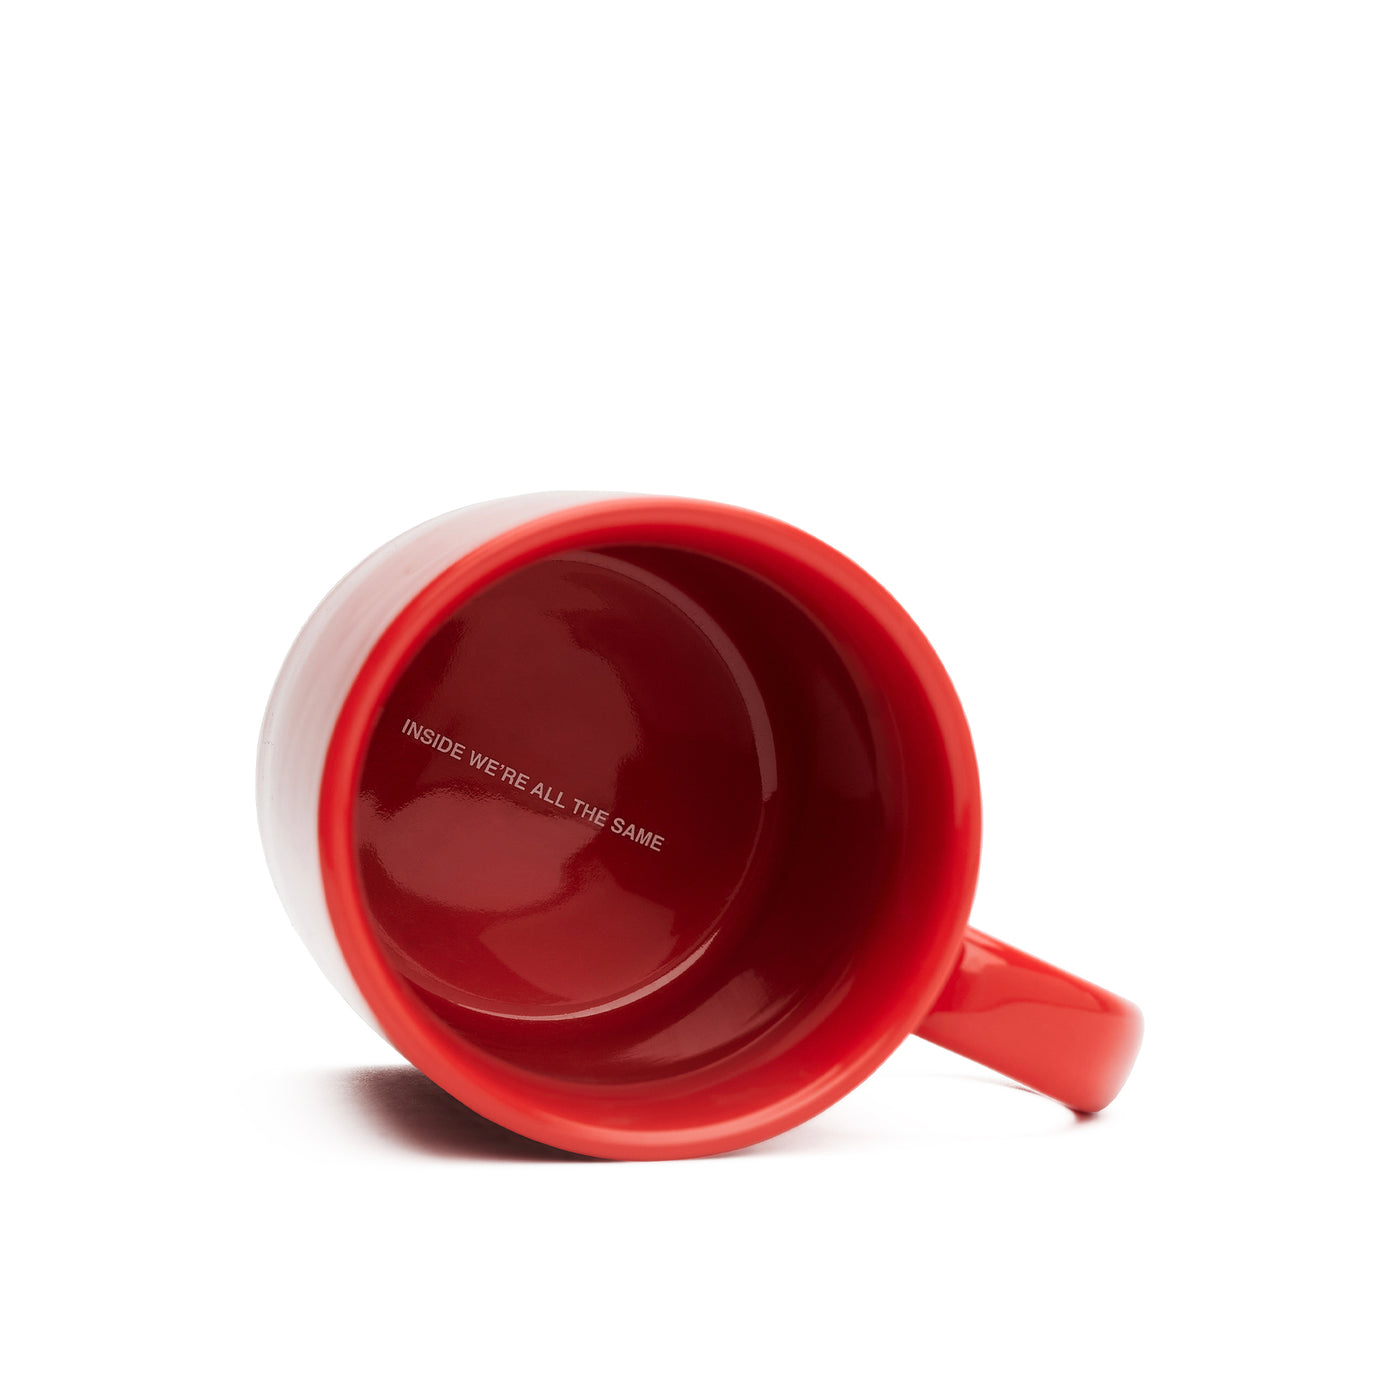 We're Not Really Strangers red mug showing the inside that says "inside we're all the same"